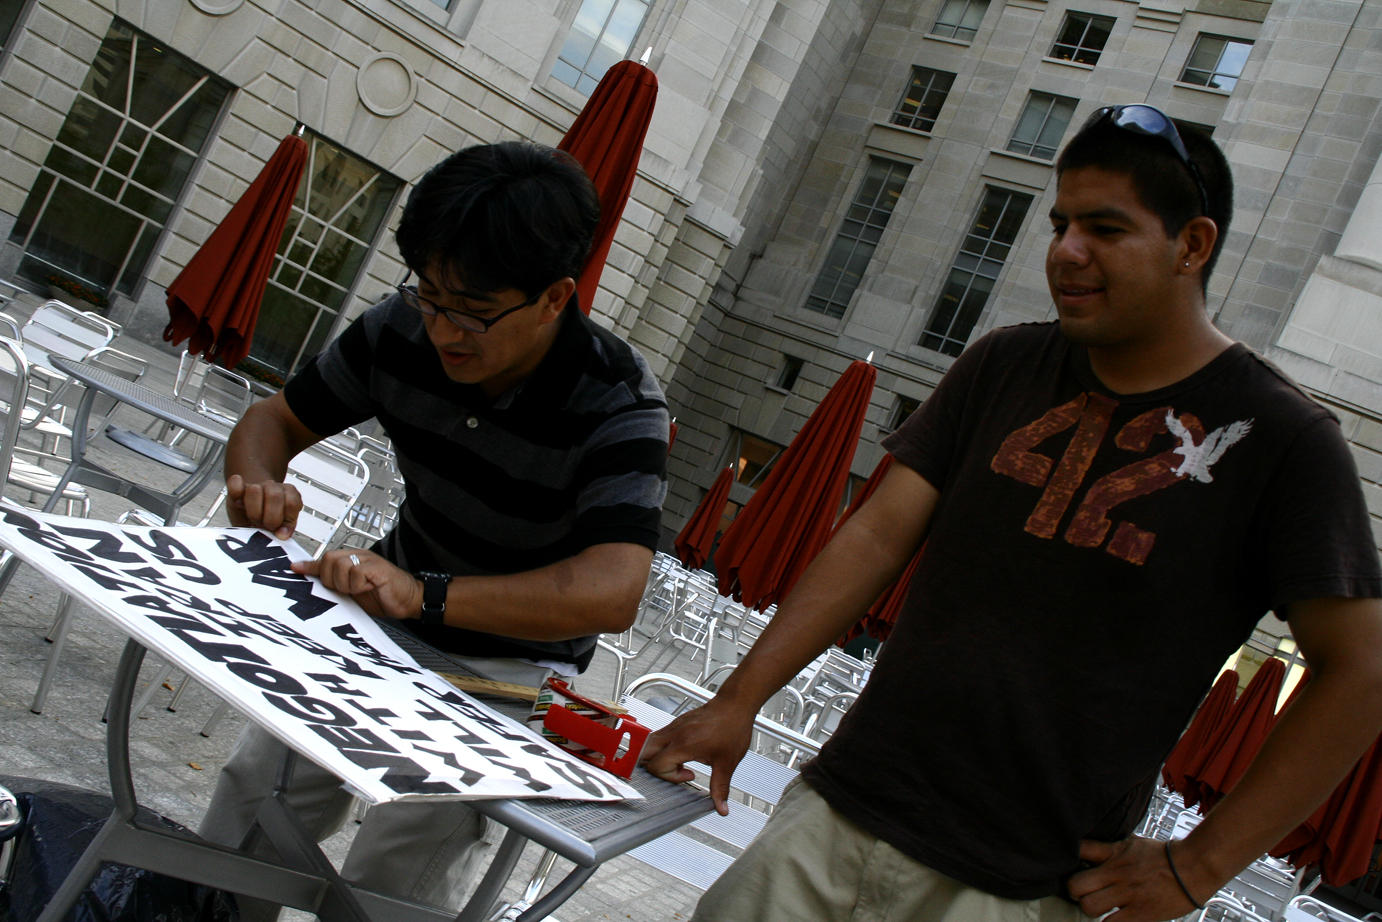 Luis & Alfredo from Peru help tape up my sign